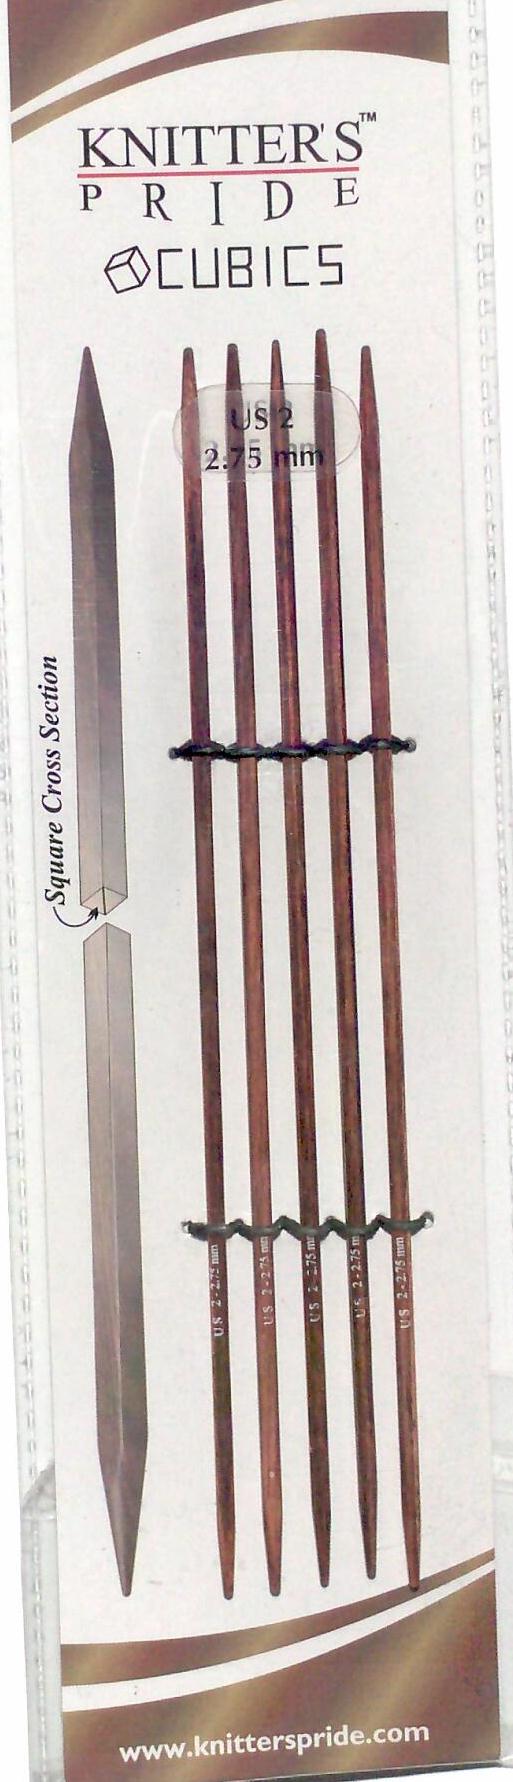 Knitter's Pride 06"/15 cm 3.25 mm/US 3 Rosewood Cubics Double Point Needles